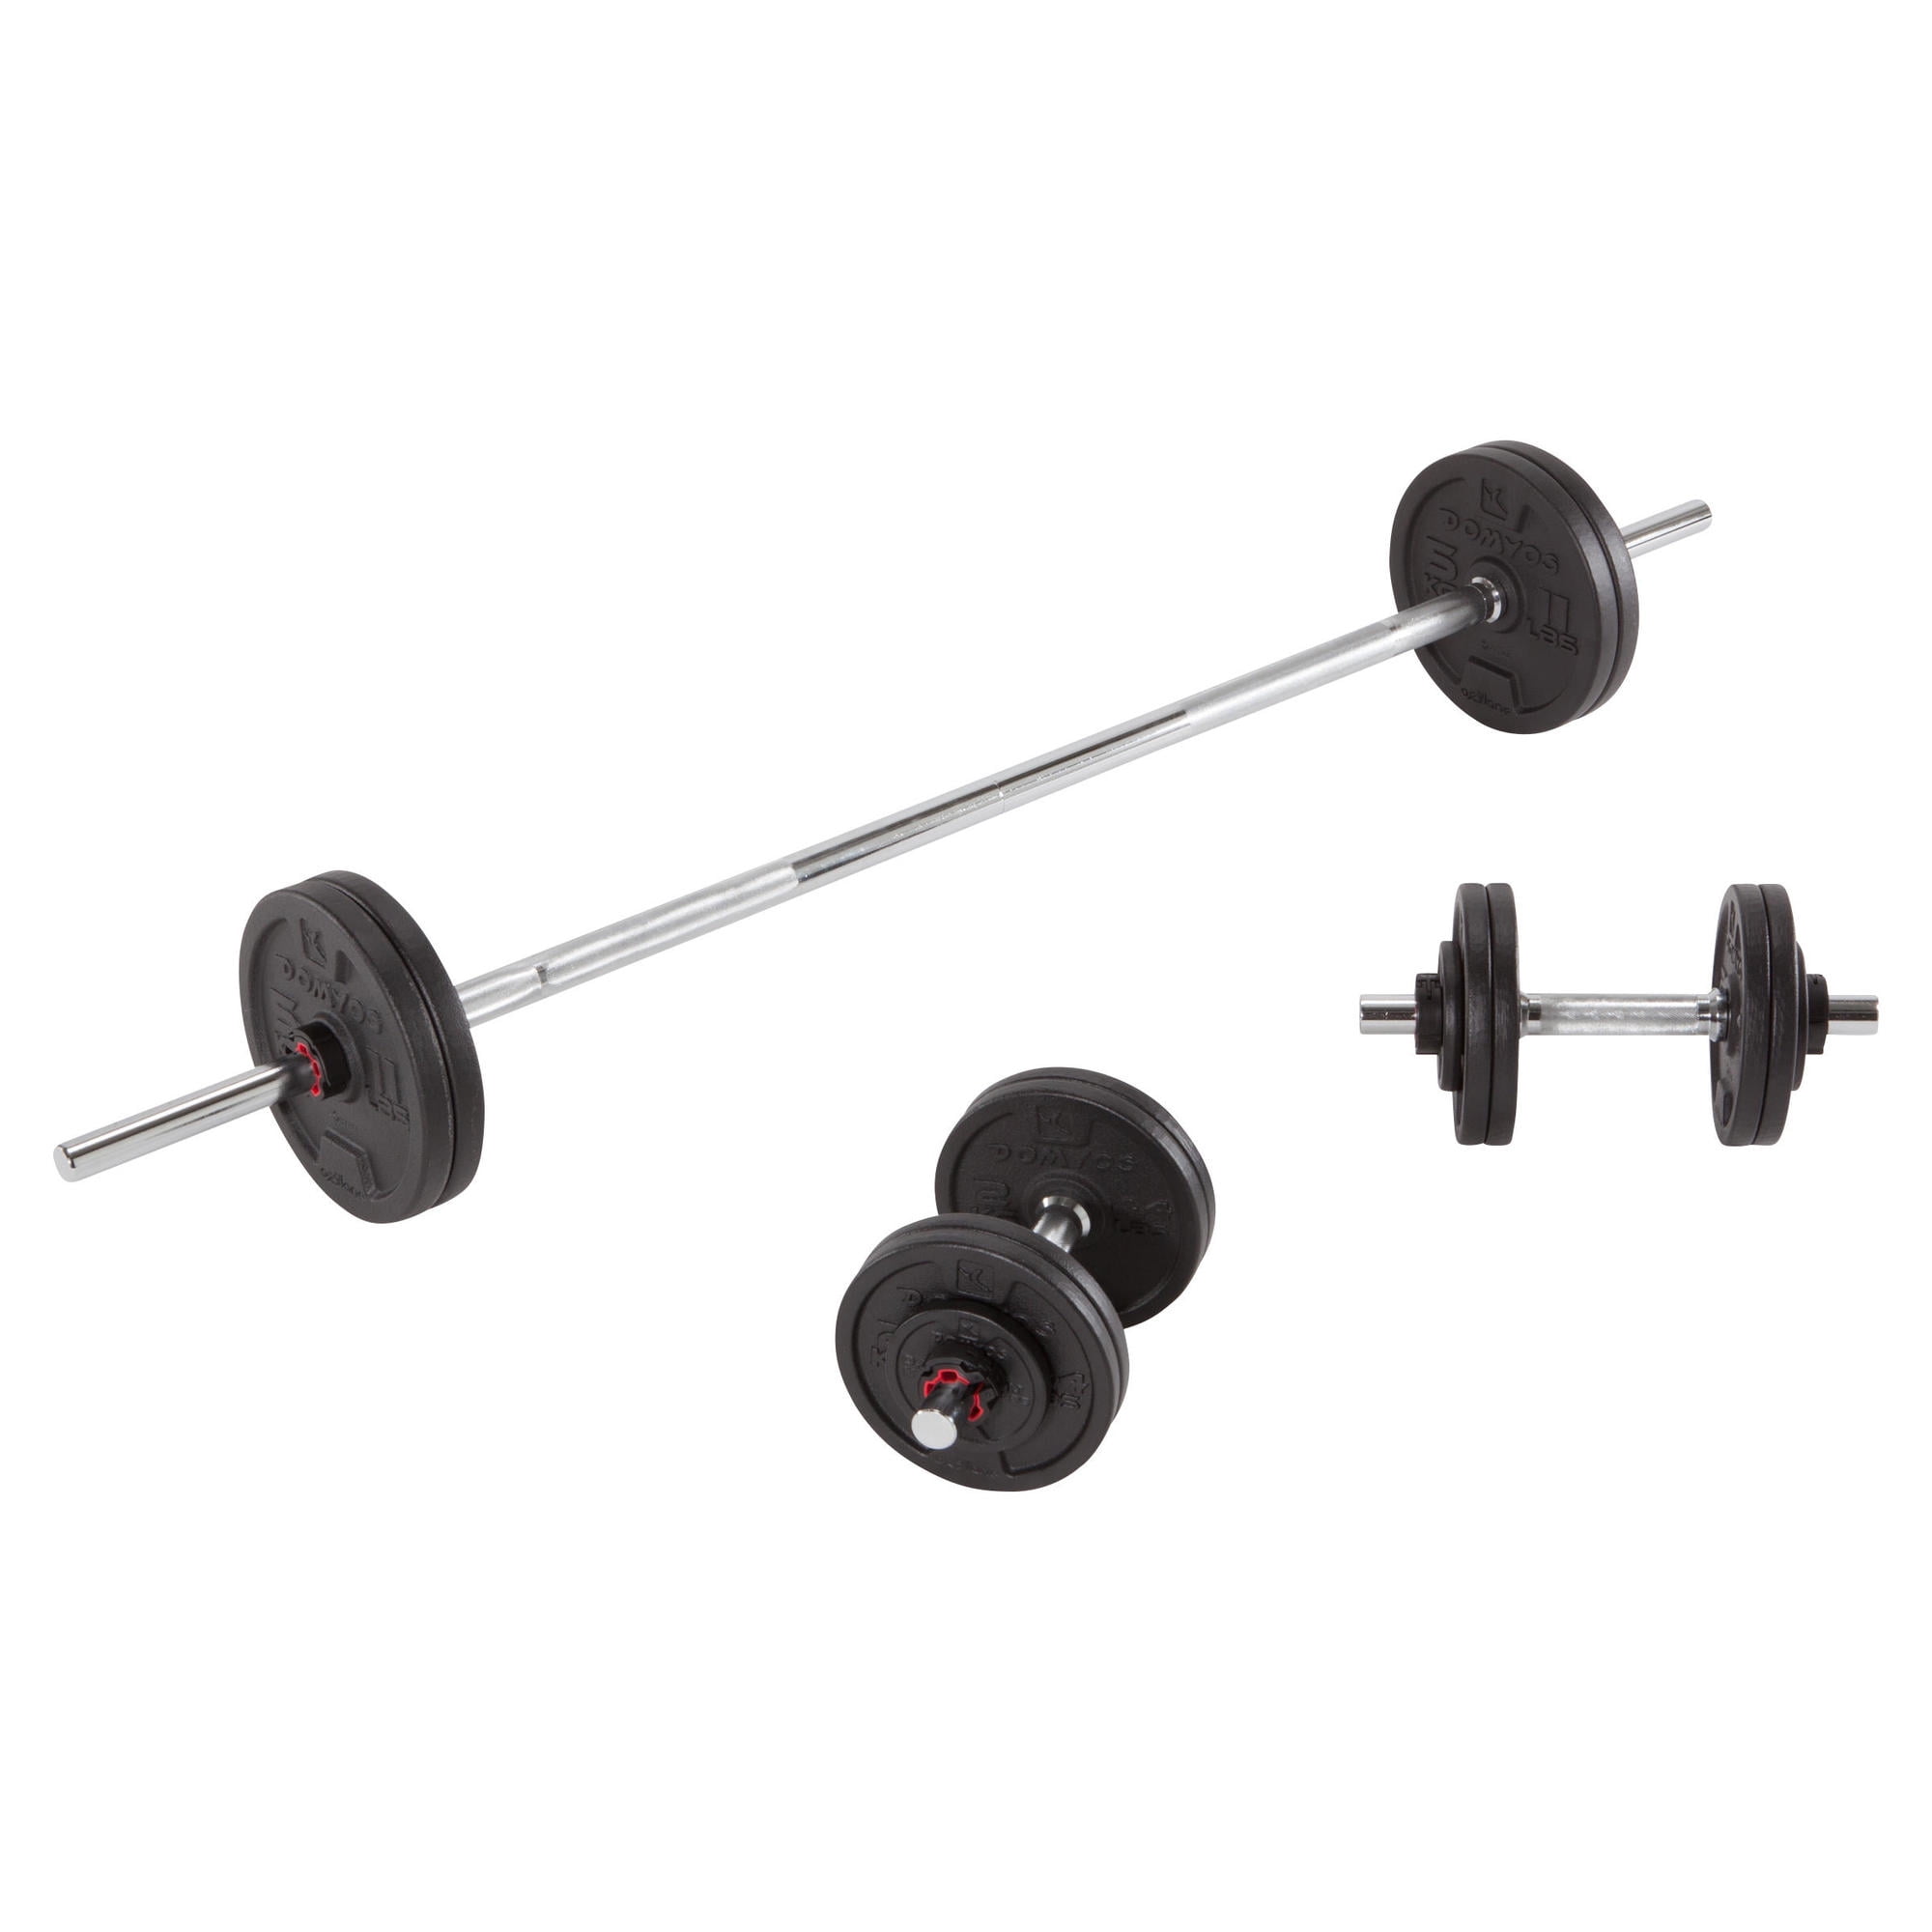 Adjustable Dumbbell Set Barbell Home GYM Fitness Workout Weight Exercise 110lb